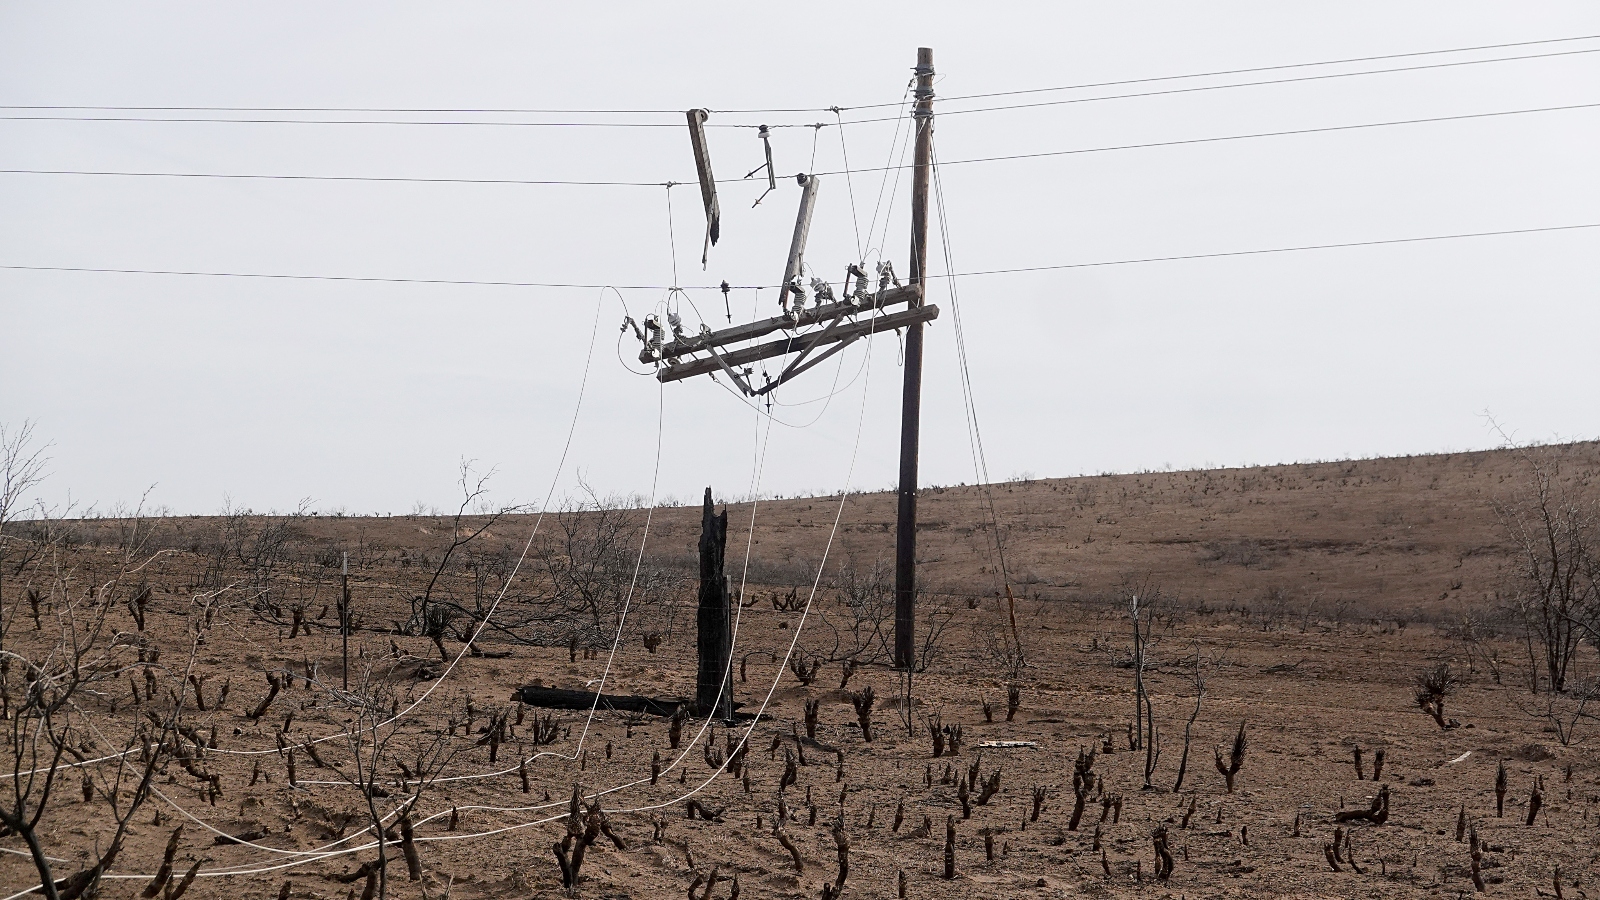 The remains of a charred pole hang from power lines in the aftermath of the Smokehouse Creek fire near Canadian, Texas. The fire burned more than a million acres in the Texas Panhandle, killing at least two people.